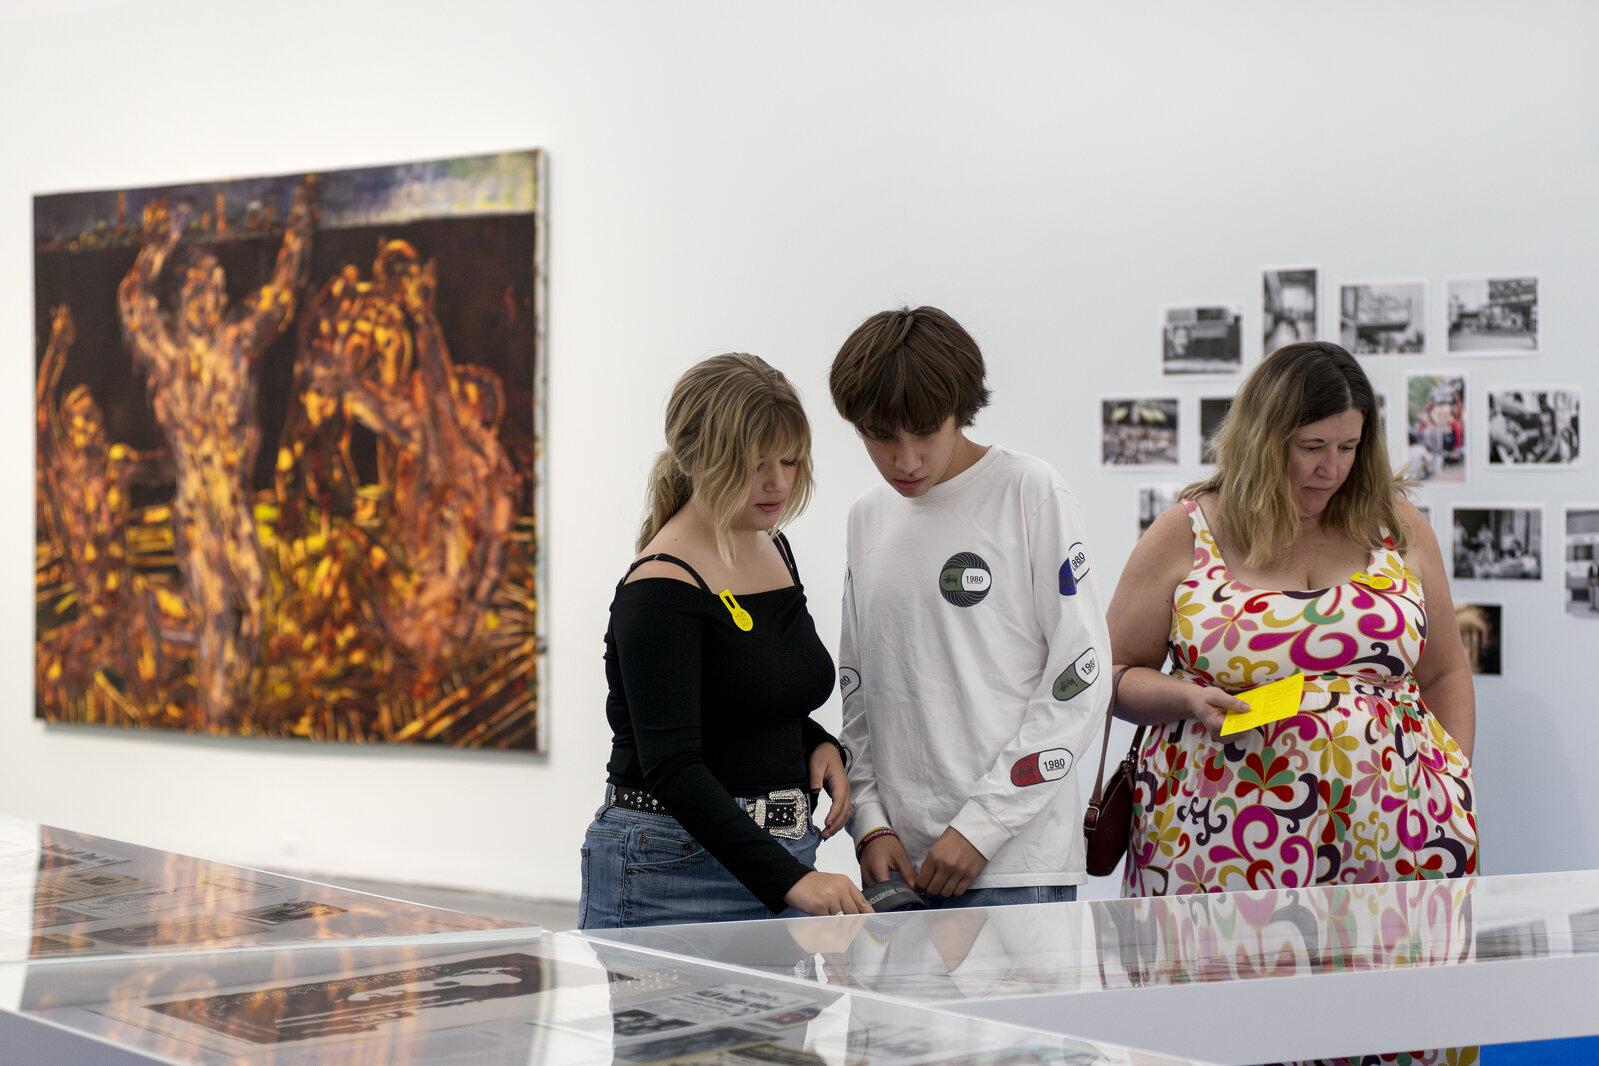 Three people look at a collection of object in display cases. Behind them, several artworks hang on a white wall.